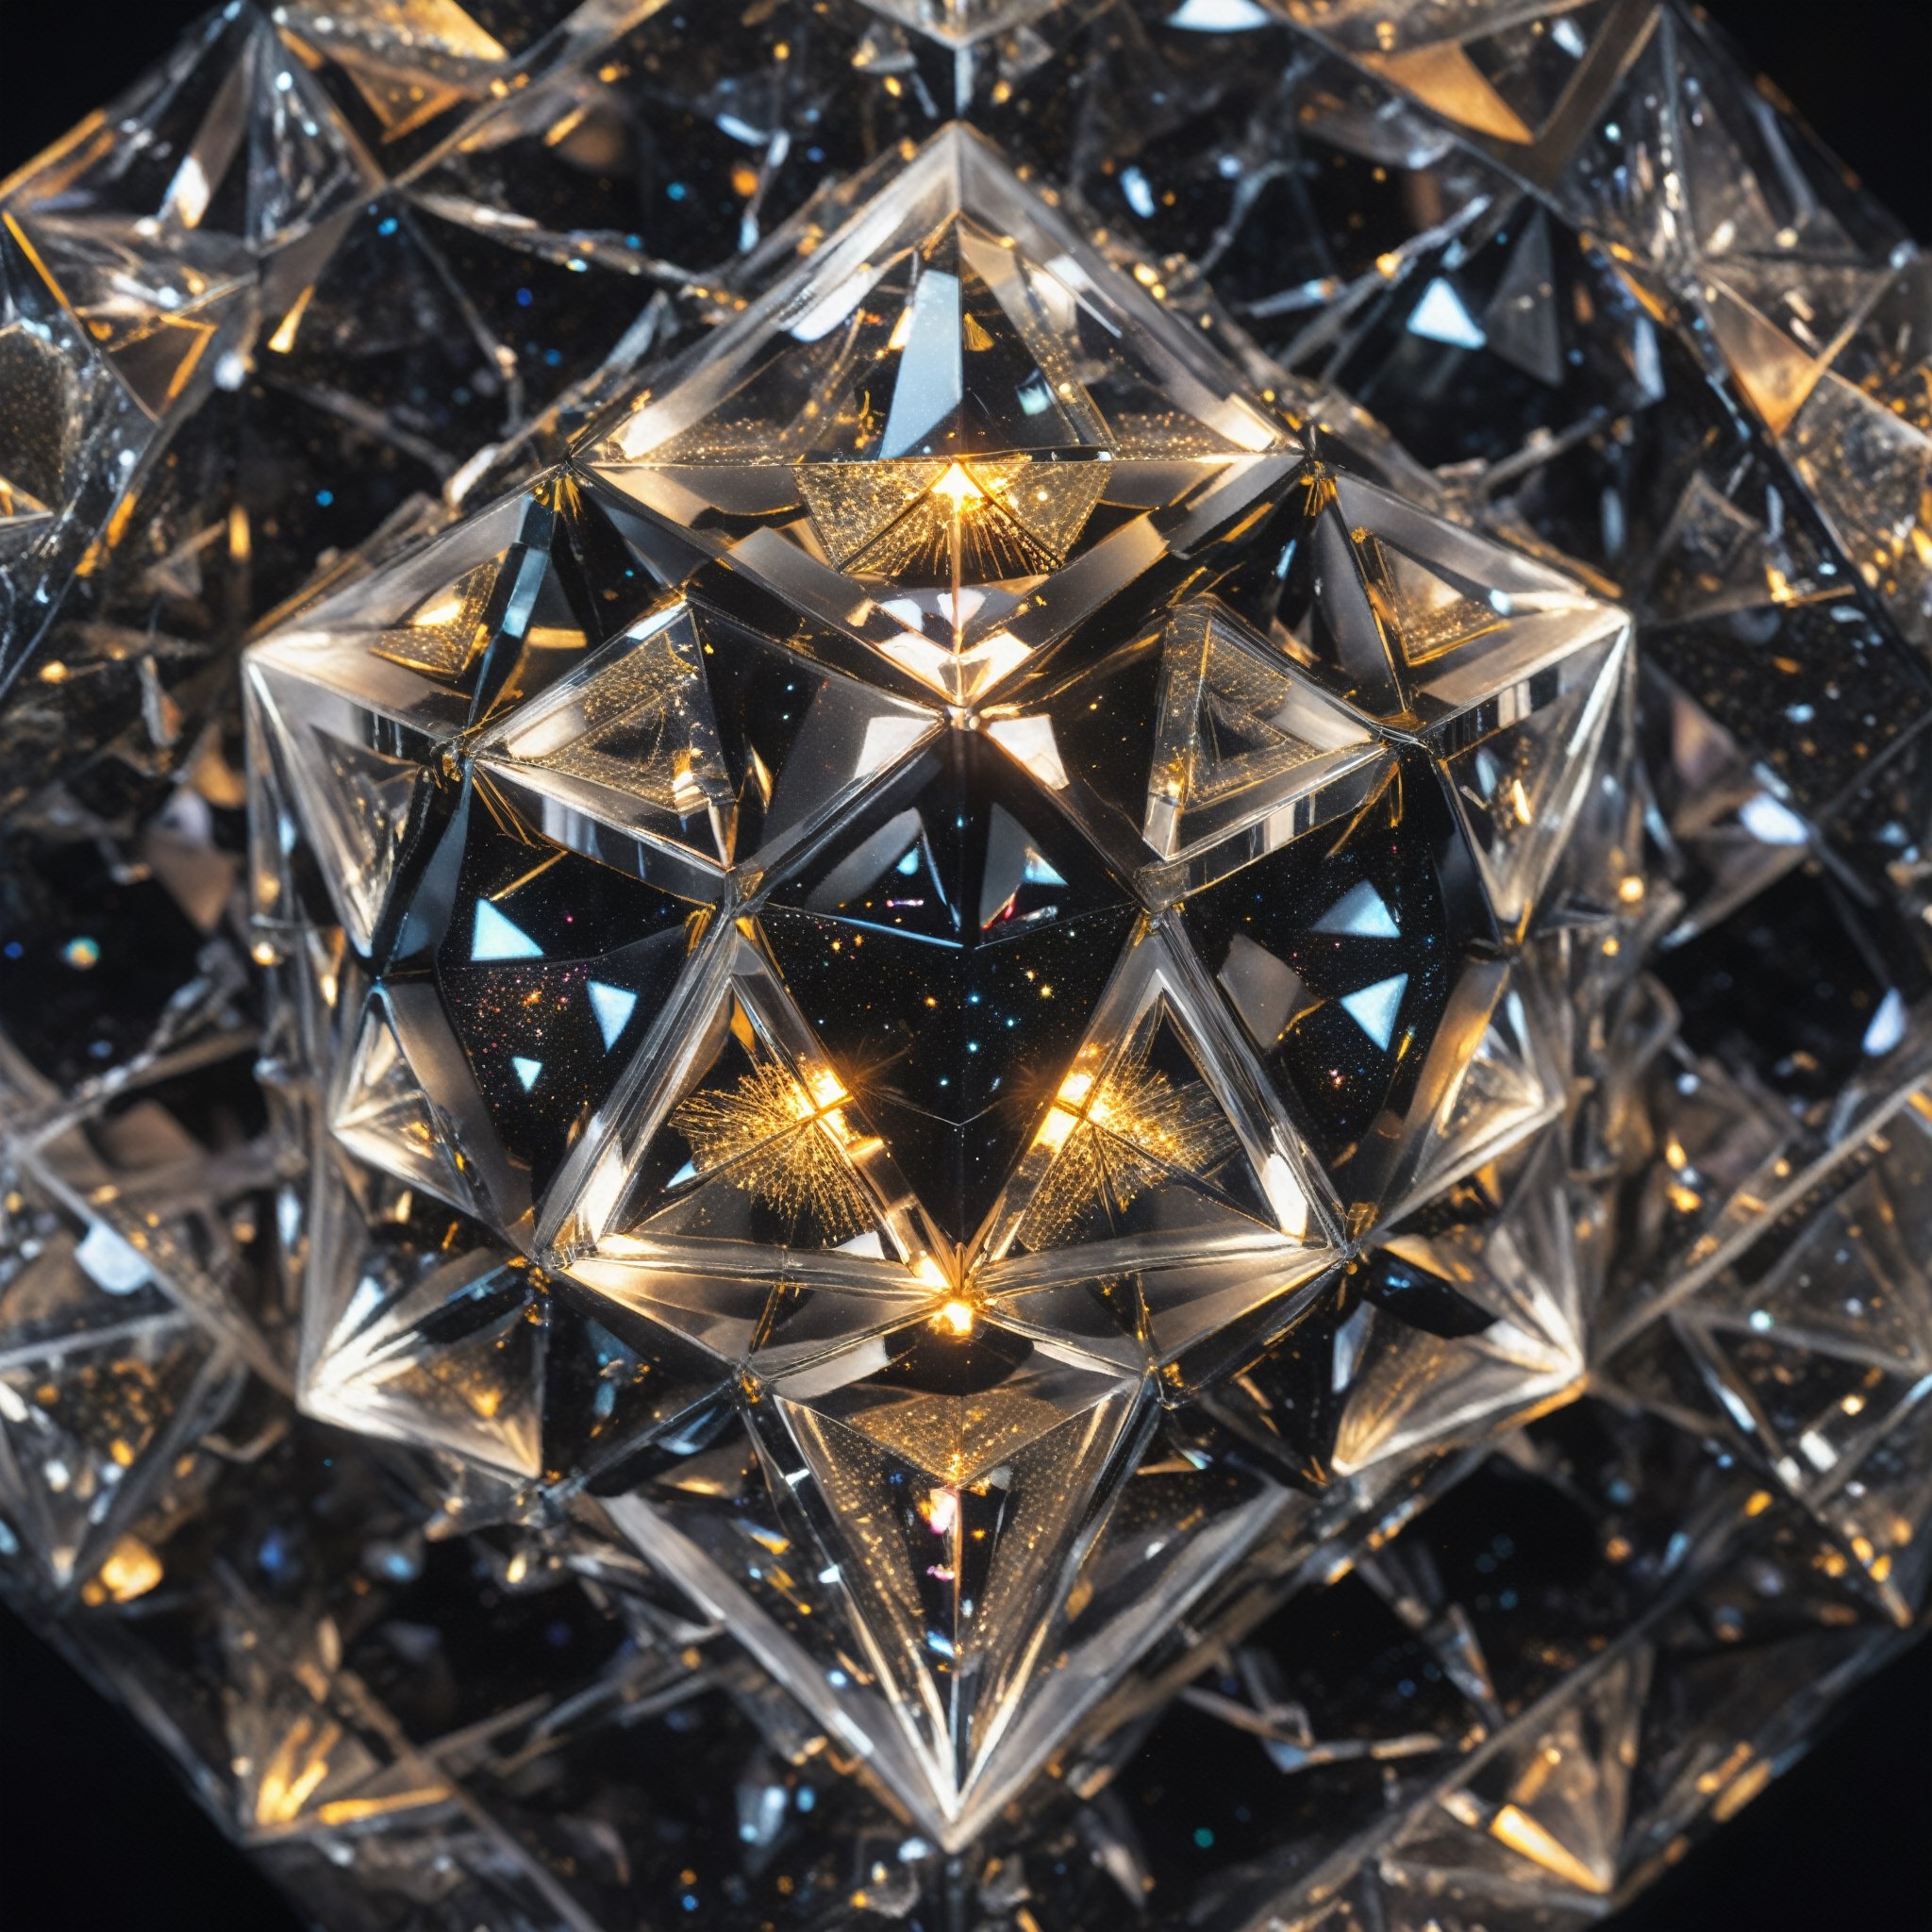 4 crystal pyramids inside a cube in a sphere contains energy, at the other end of the universe, in dark matter, time crystals, particles and quantum waves, nothingness, infinity, extremely detailed, UHD, black and silver neon colours,LegendDarkFantasy,glitter